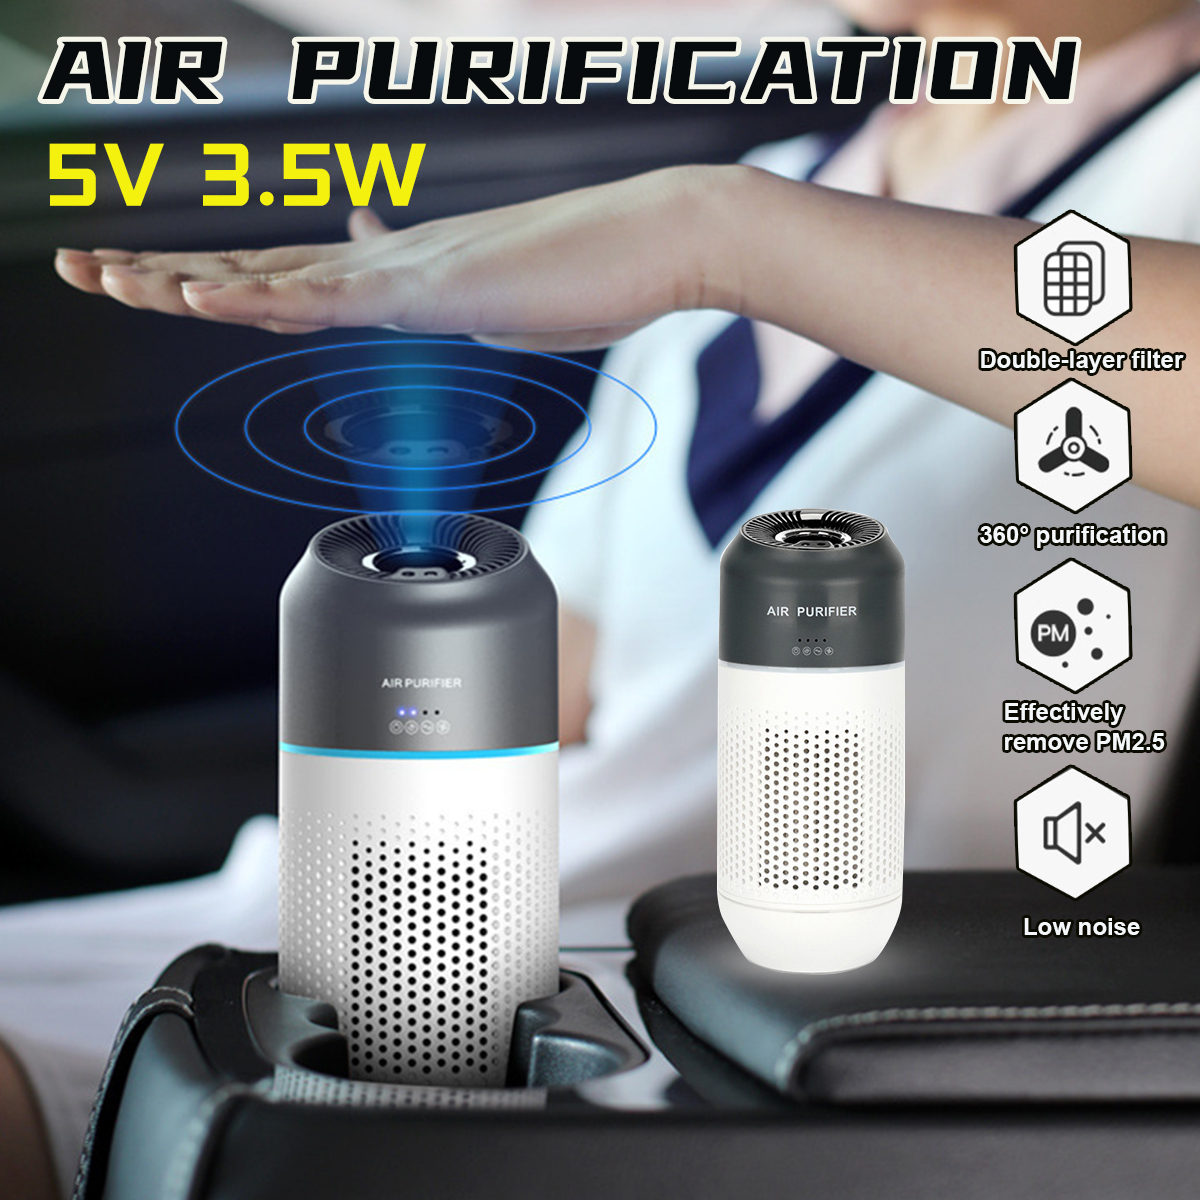 5V-Air-Purifier-2-Gear-Wind-Speed-79msup3h-Remove-PM25-Hand-Gesture-Infrared-Sensor-Low-Noise-for-Ho-1755462-9